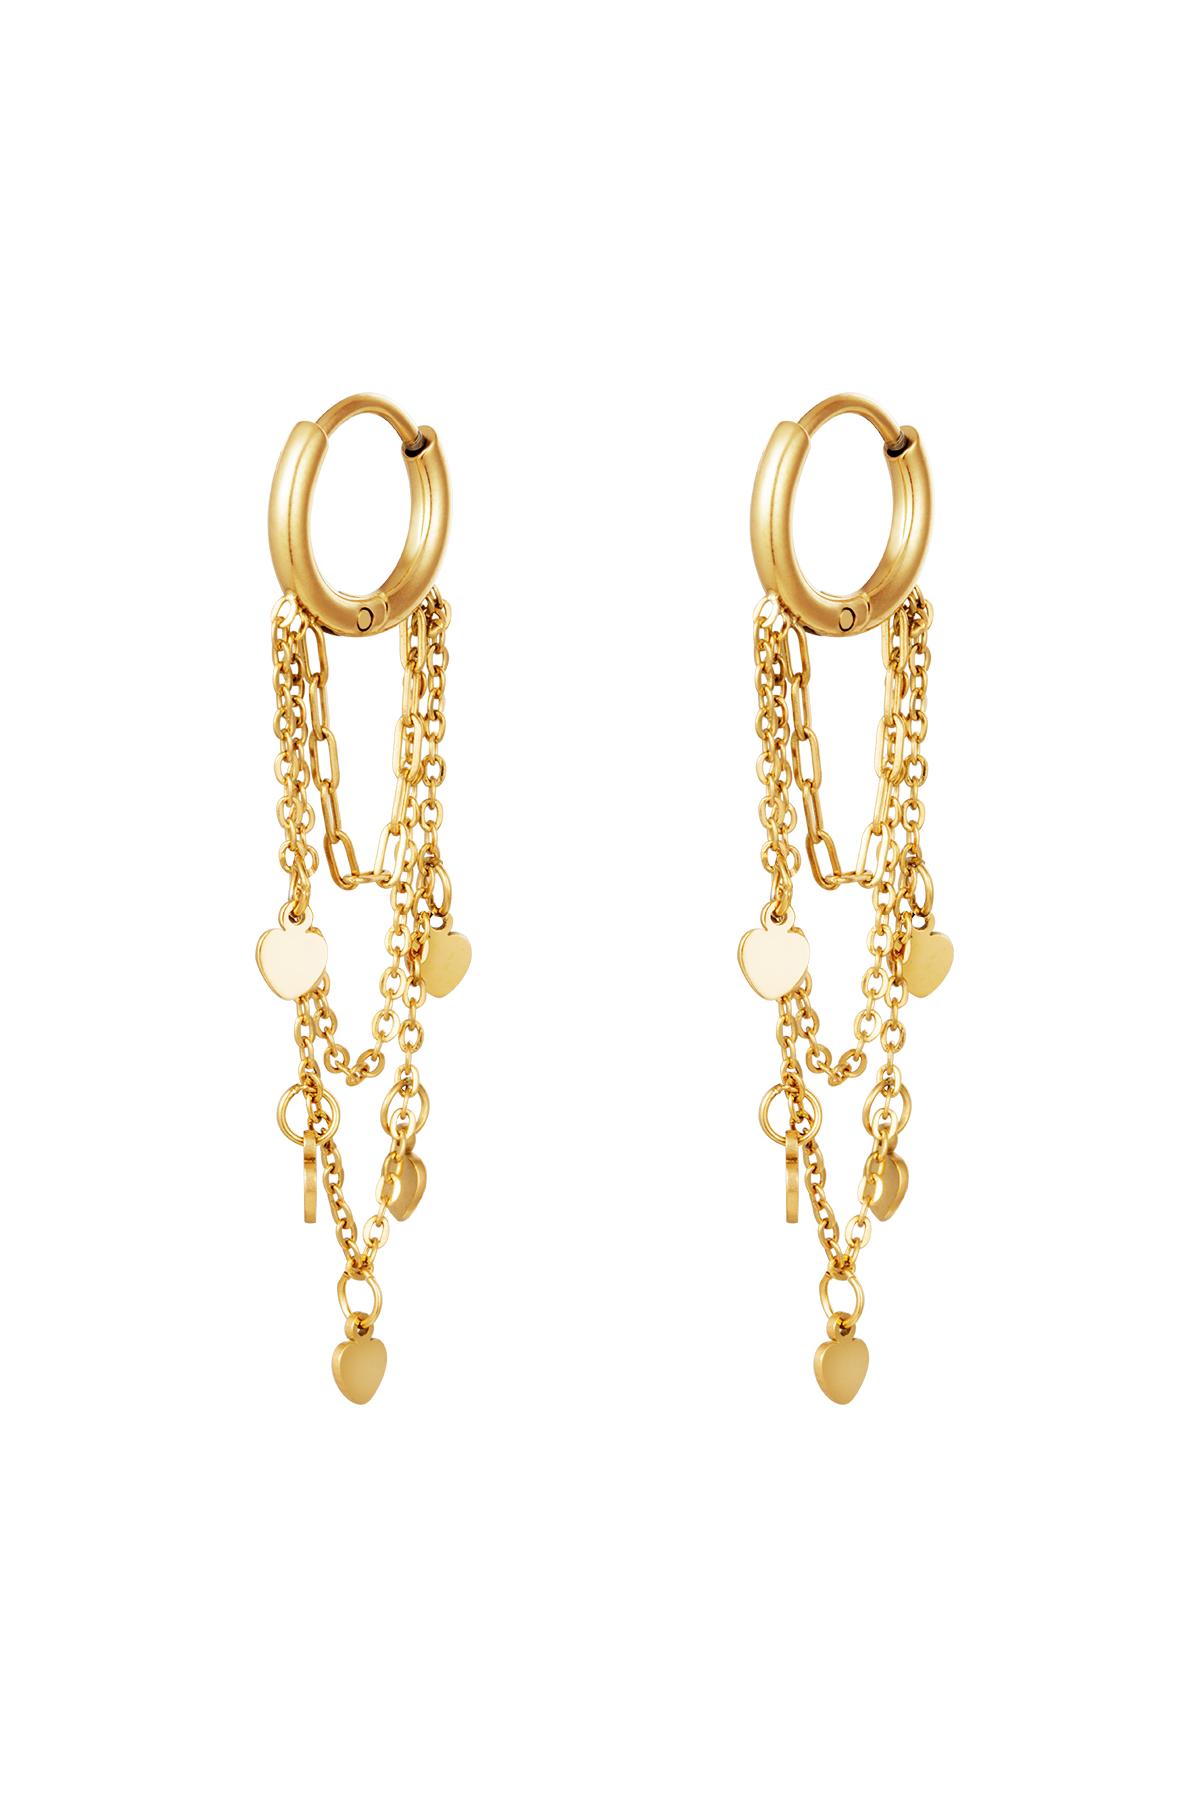 Gold / Earrings Hanging Hearts Gold Stainless Steel 